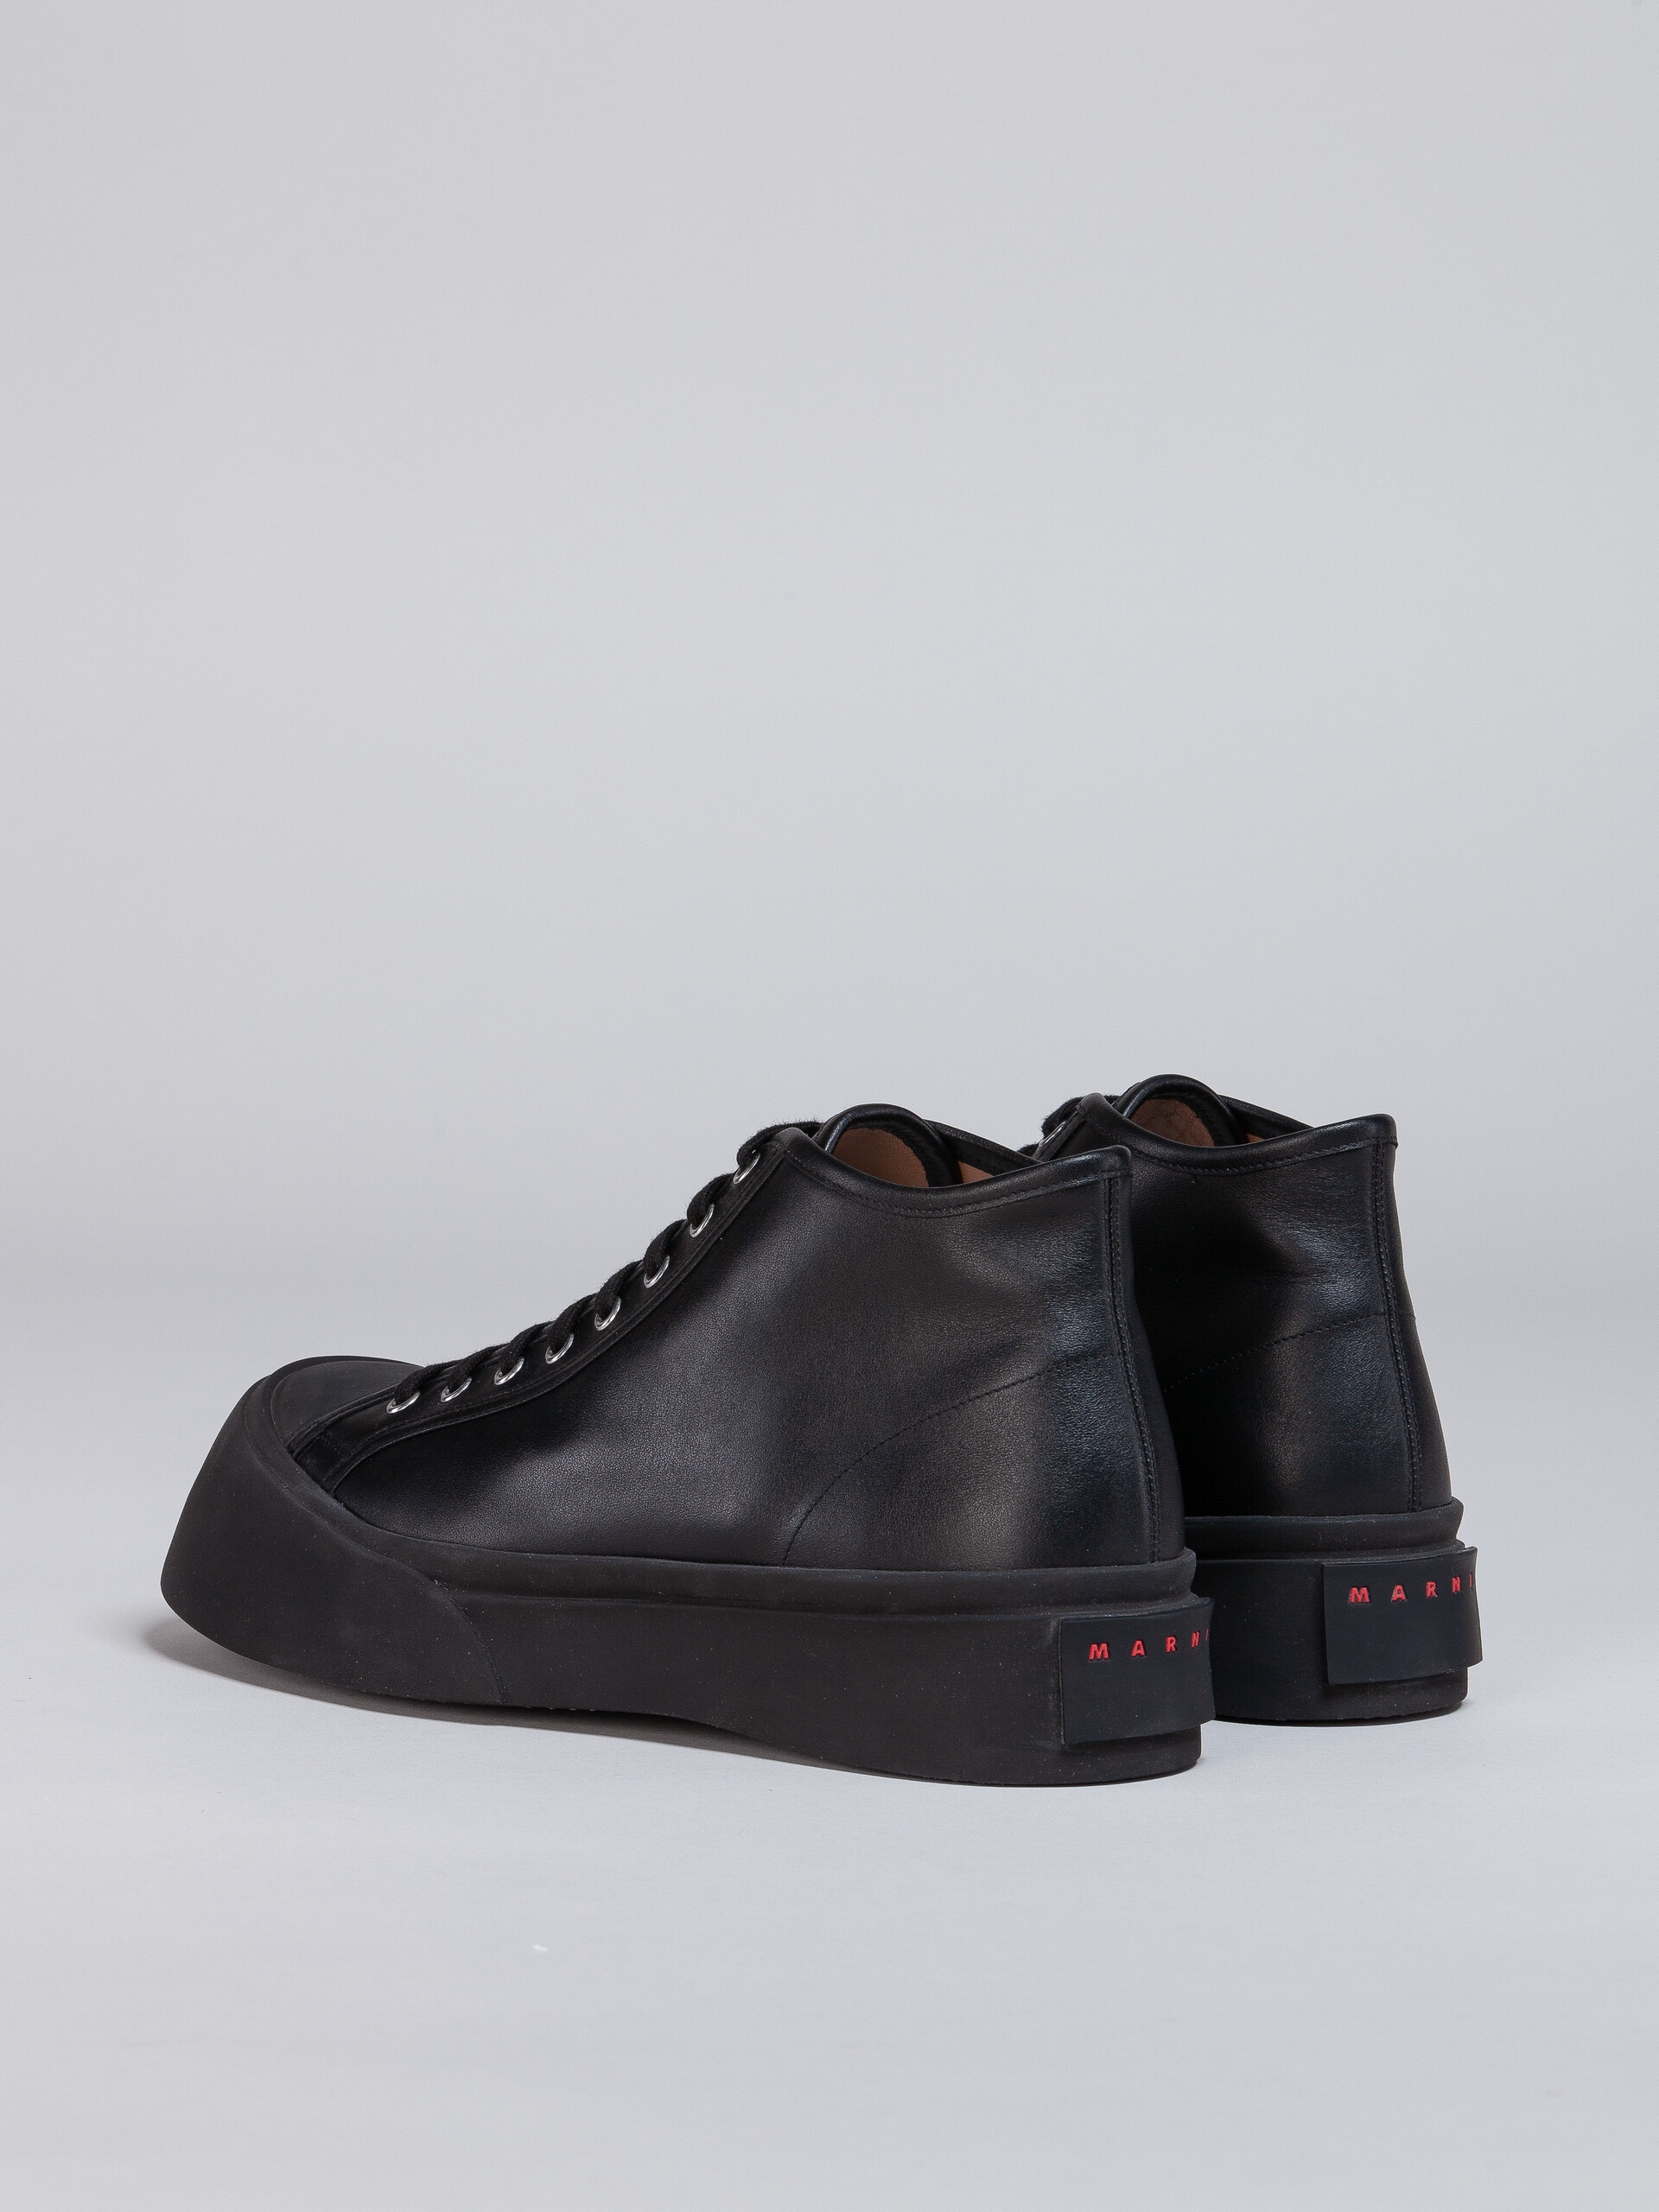 Black leather PABLO high-top  sneaker - Sneakers - Image 3